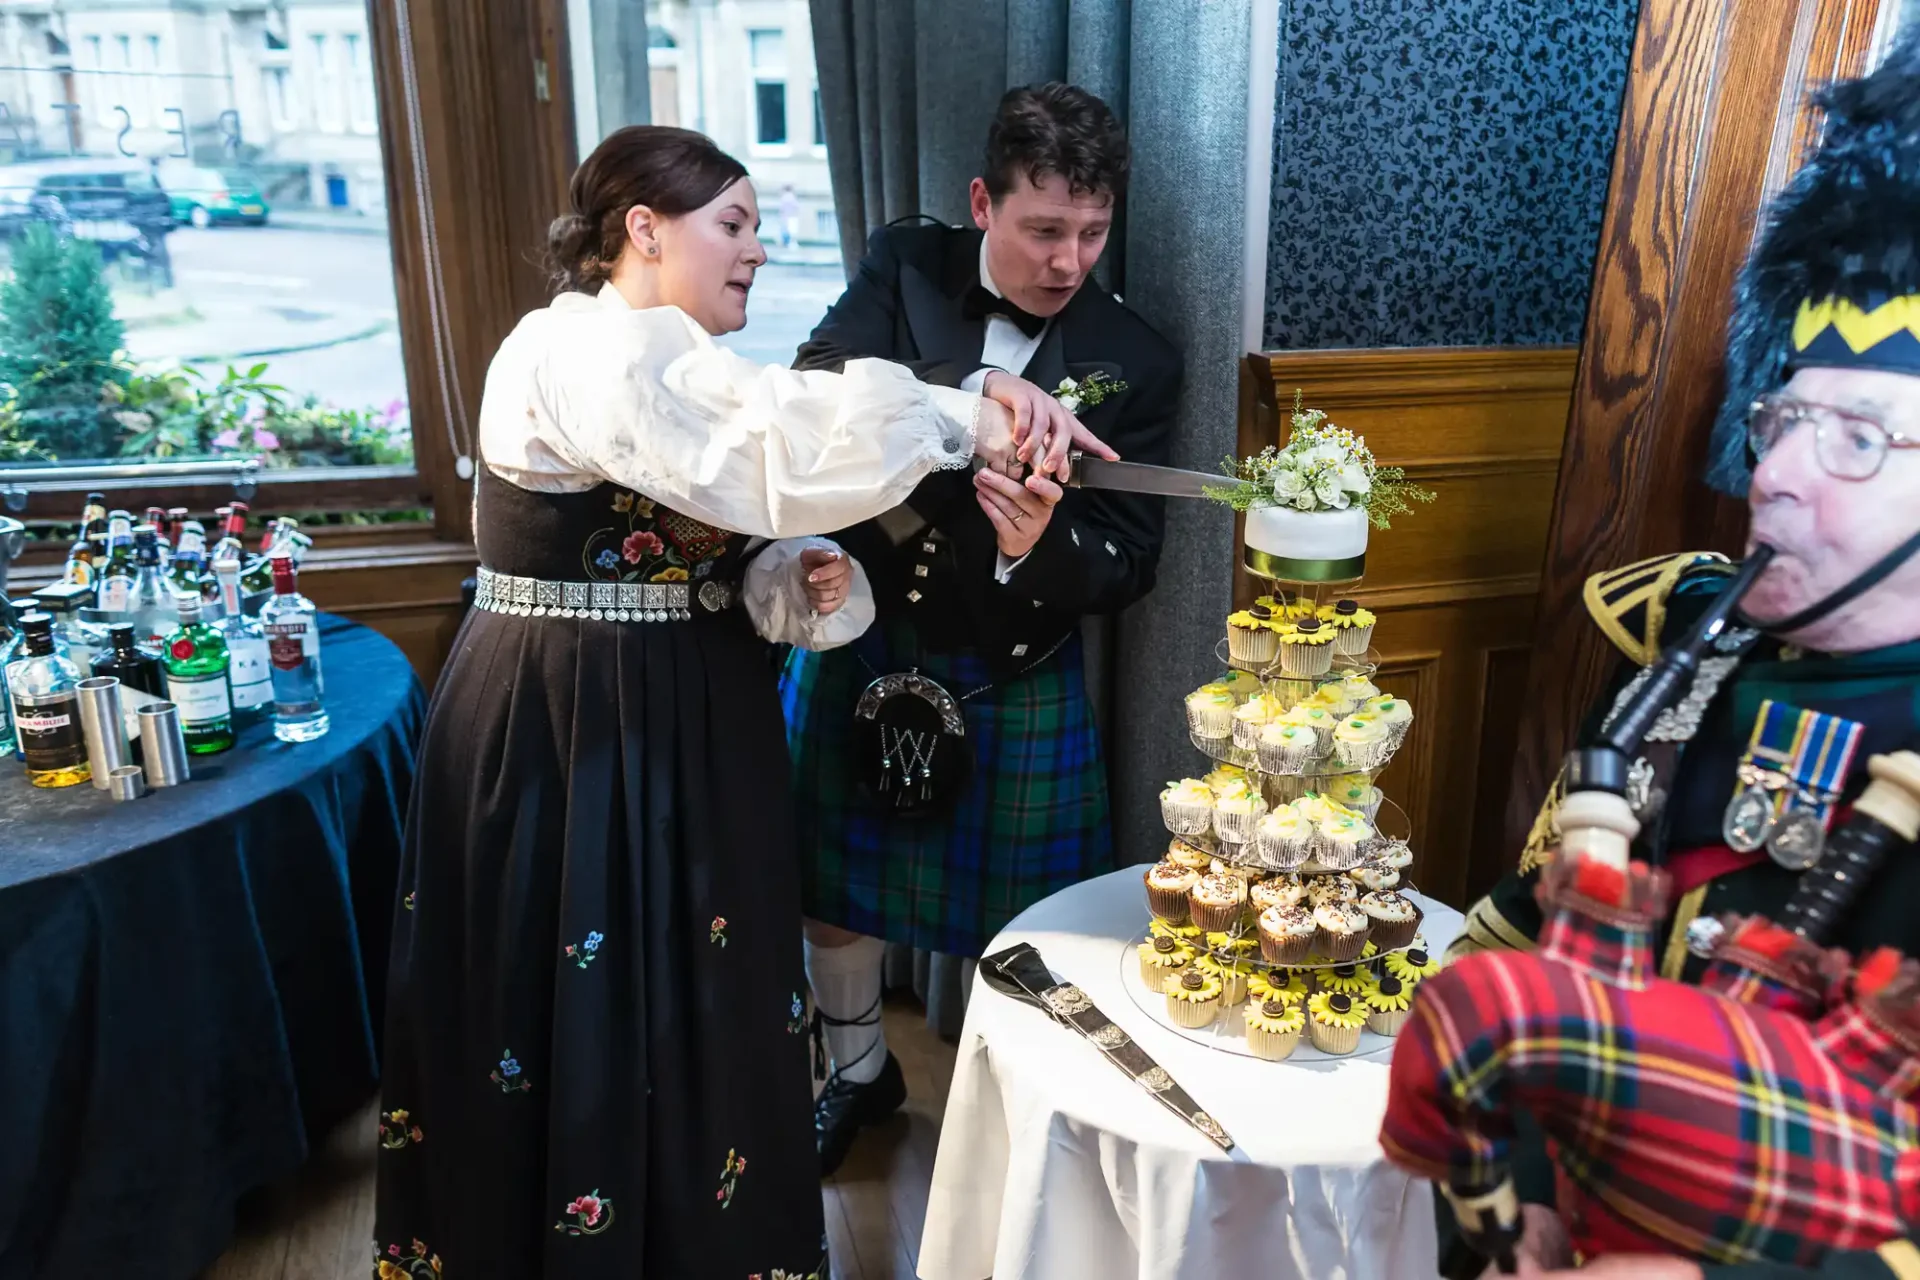 A couple in traditional scottish attire cuts a wedding cake while a bagpiper in a tartan kilt watches at an indoor reception.